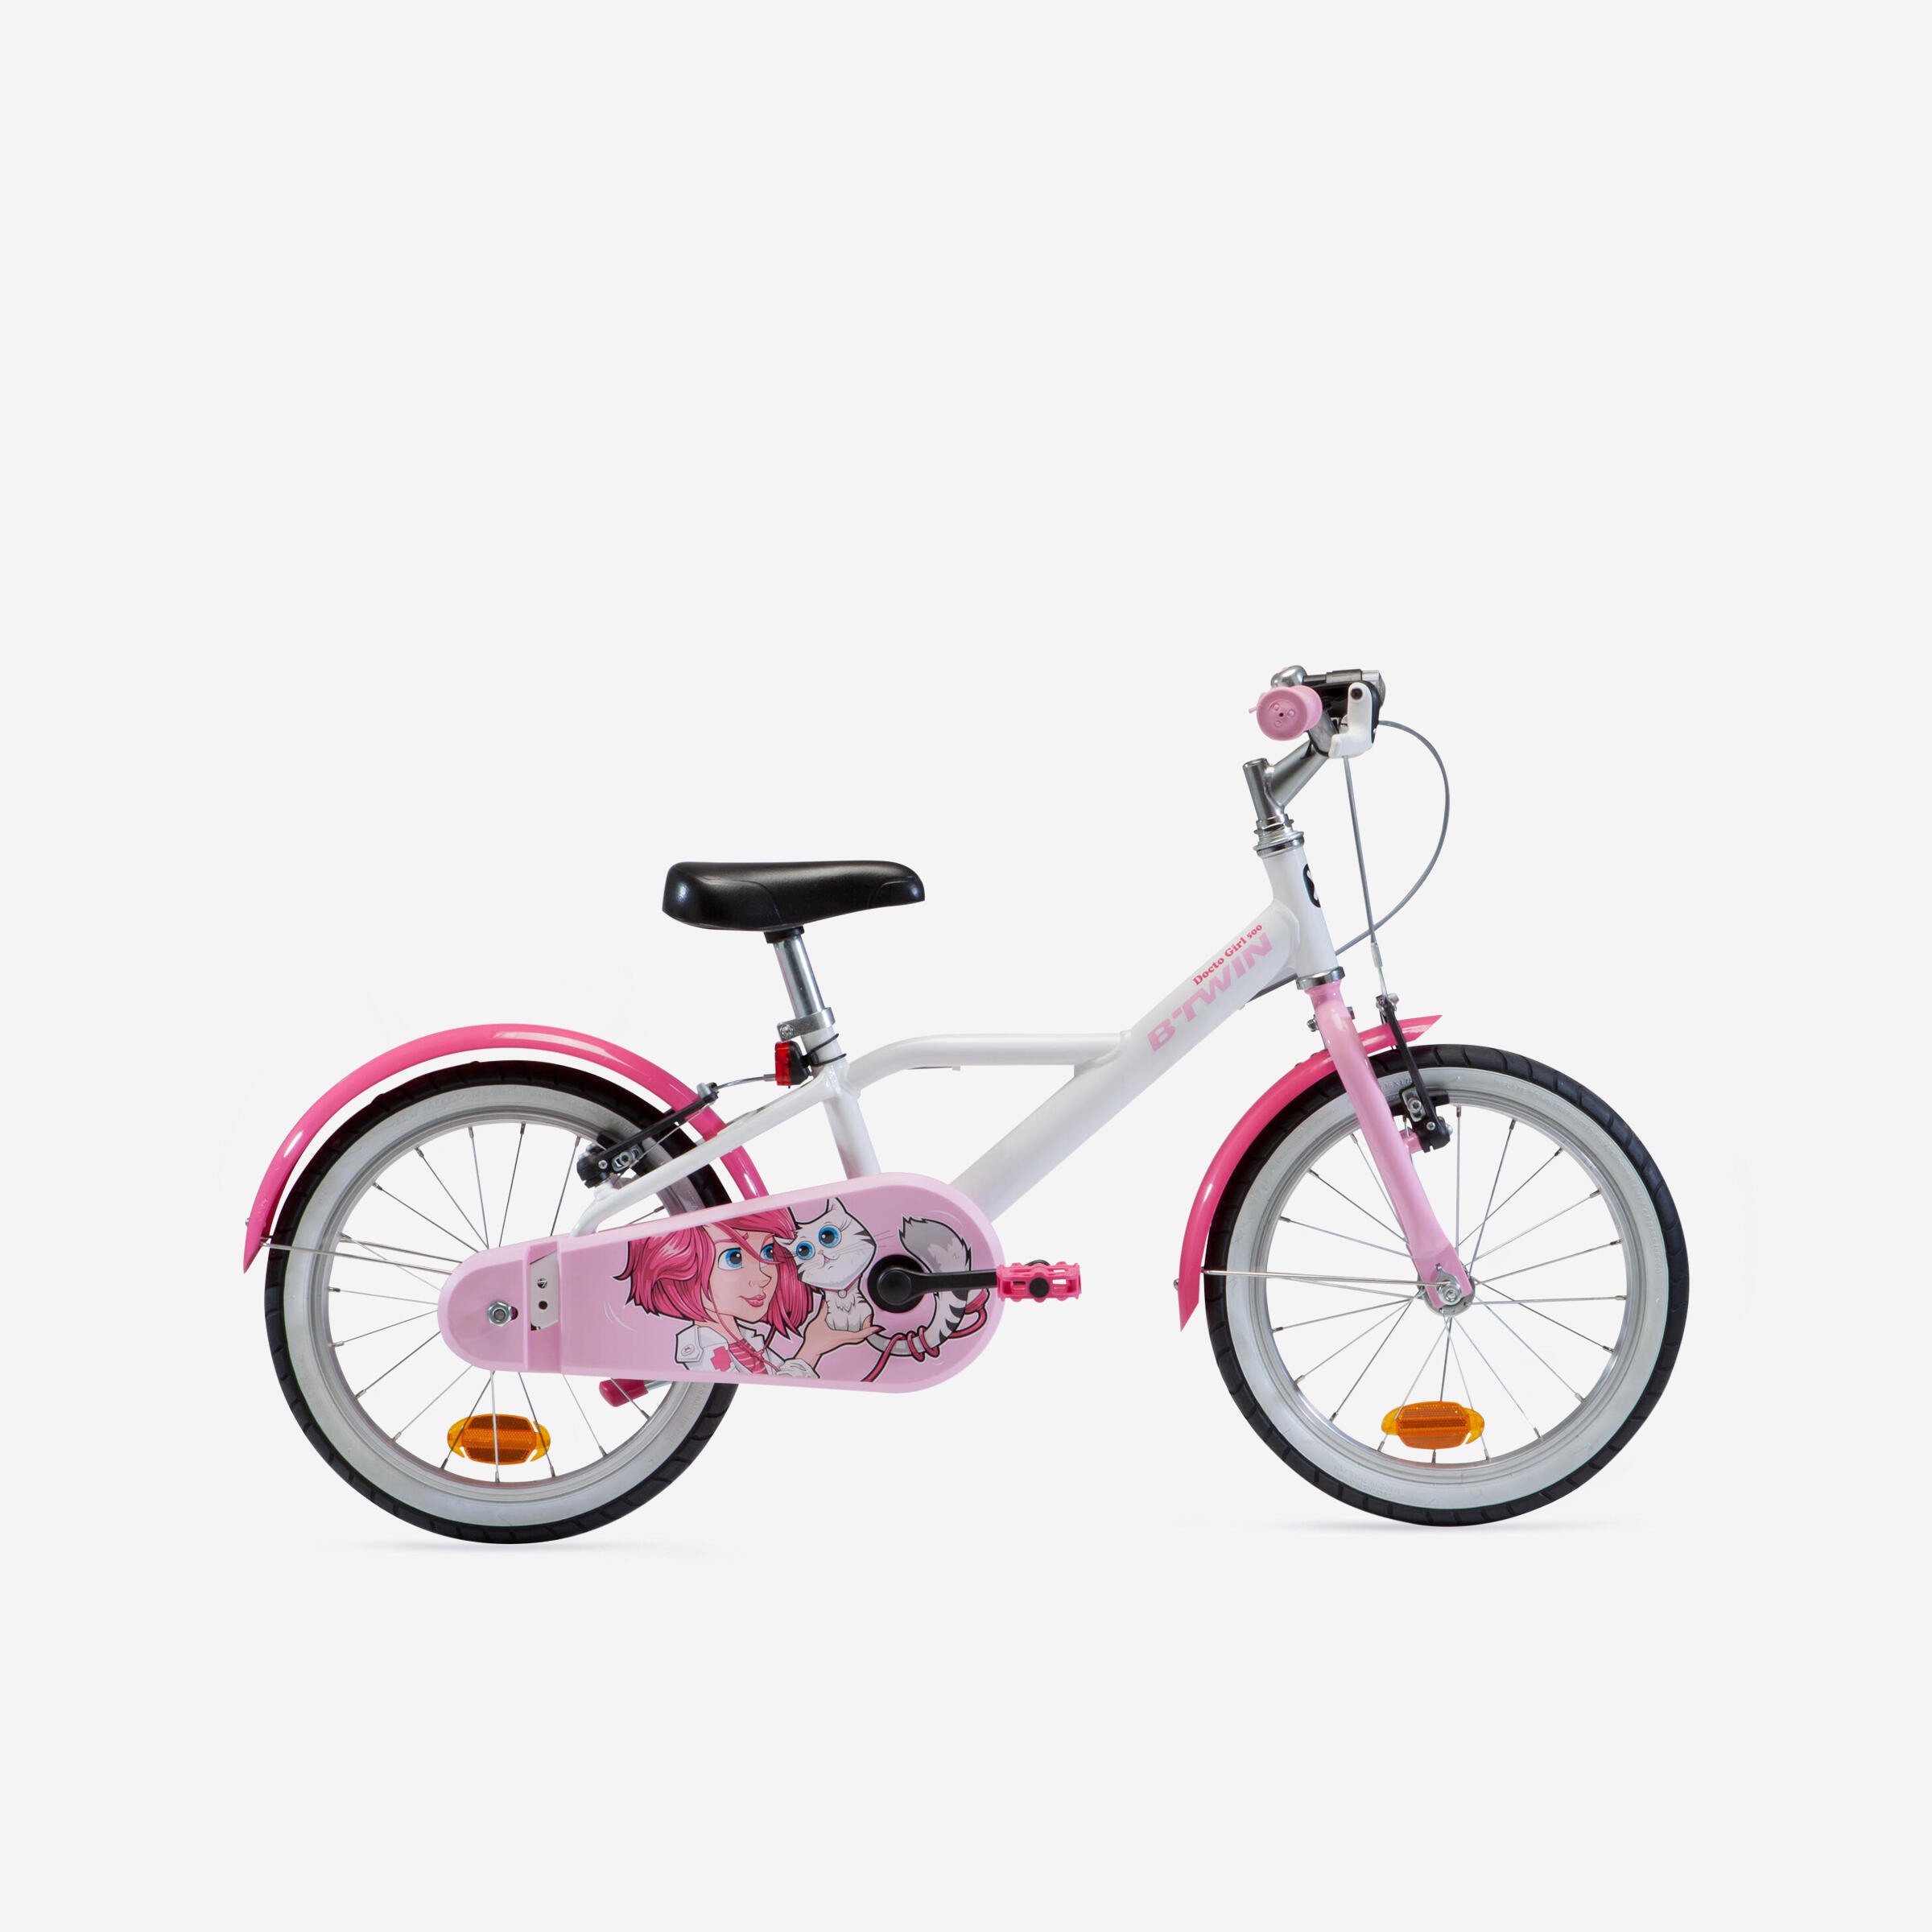 16 Inch KIDS BIKE Doctogirl 500 4-6 YEARS OLD - Pink 1/9